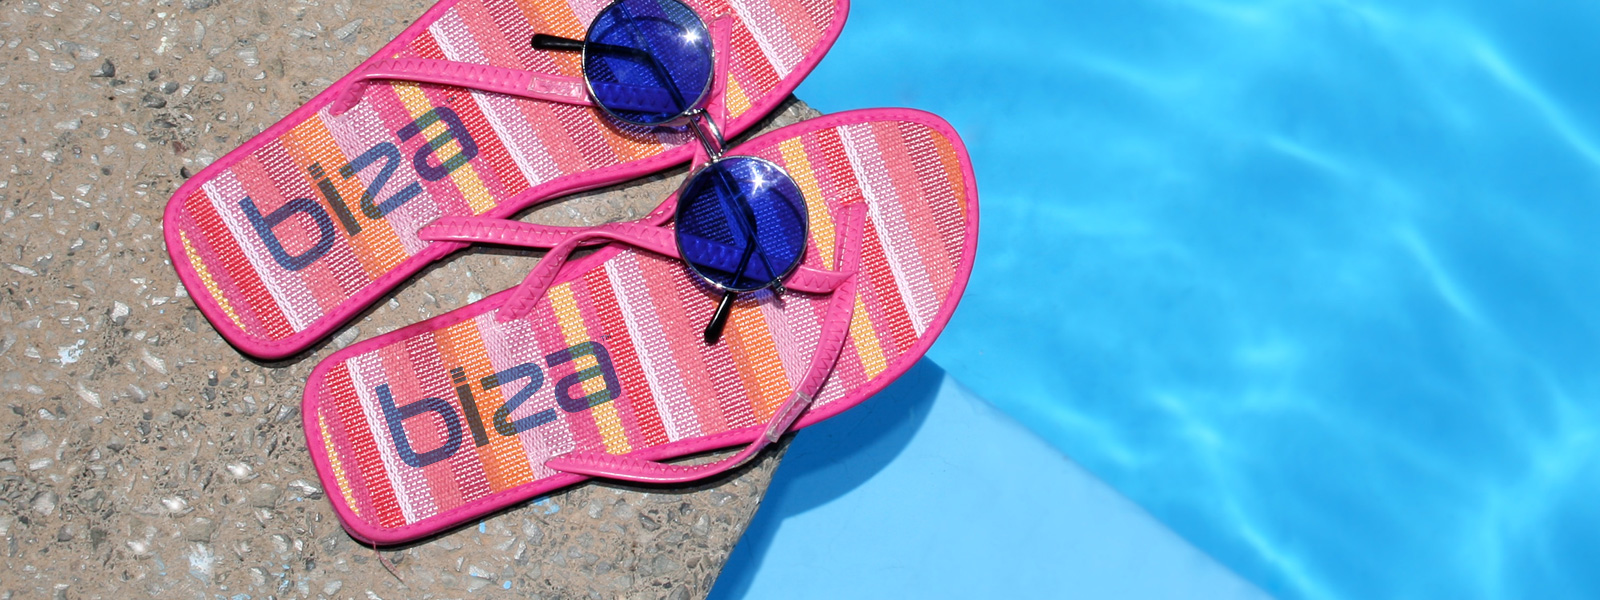 Sandals with the Biza logo on them next to a pool.